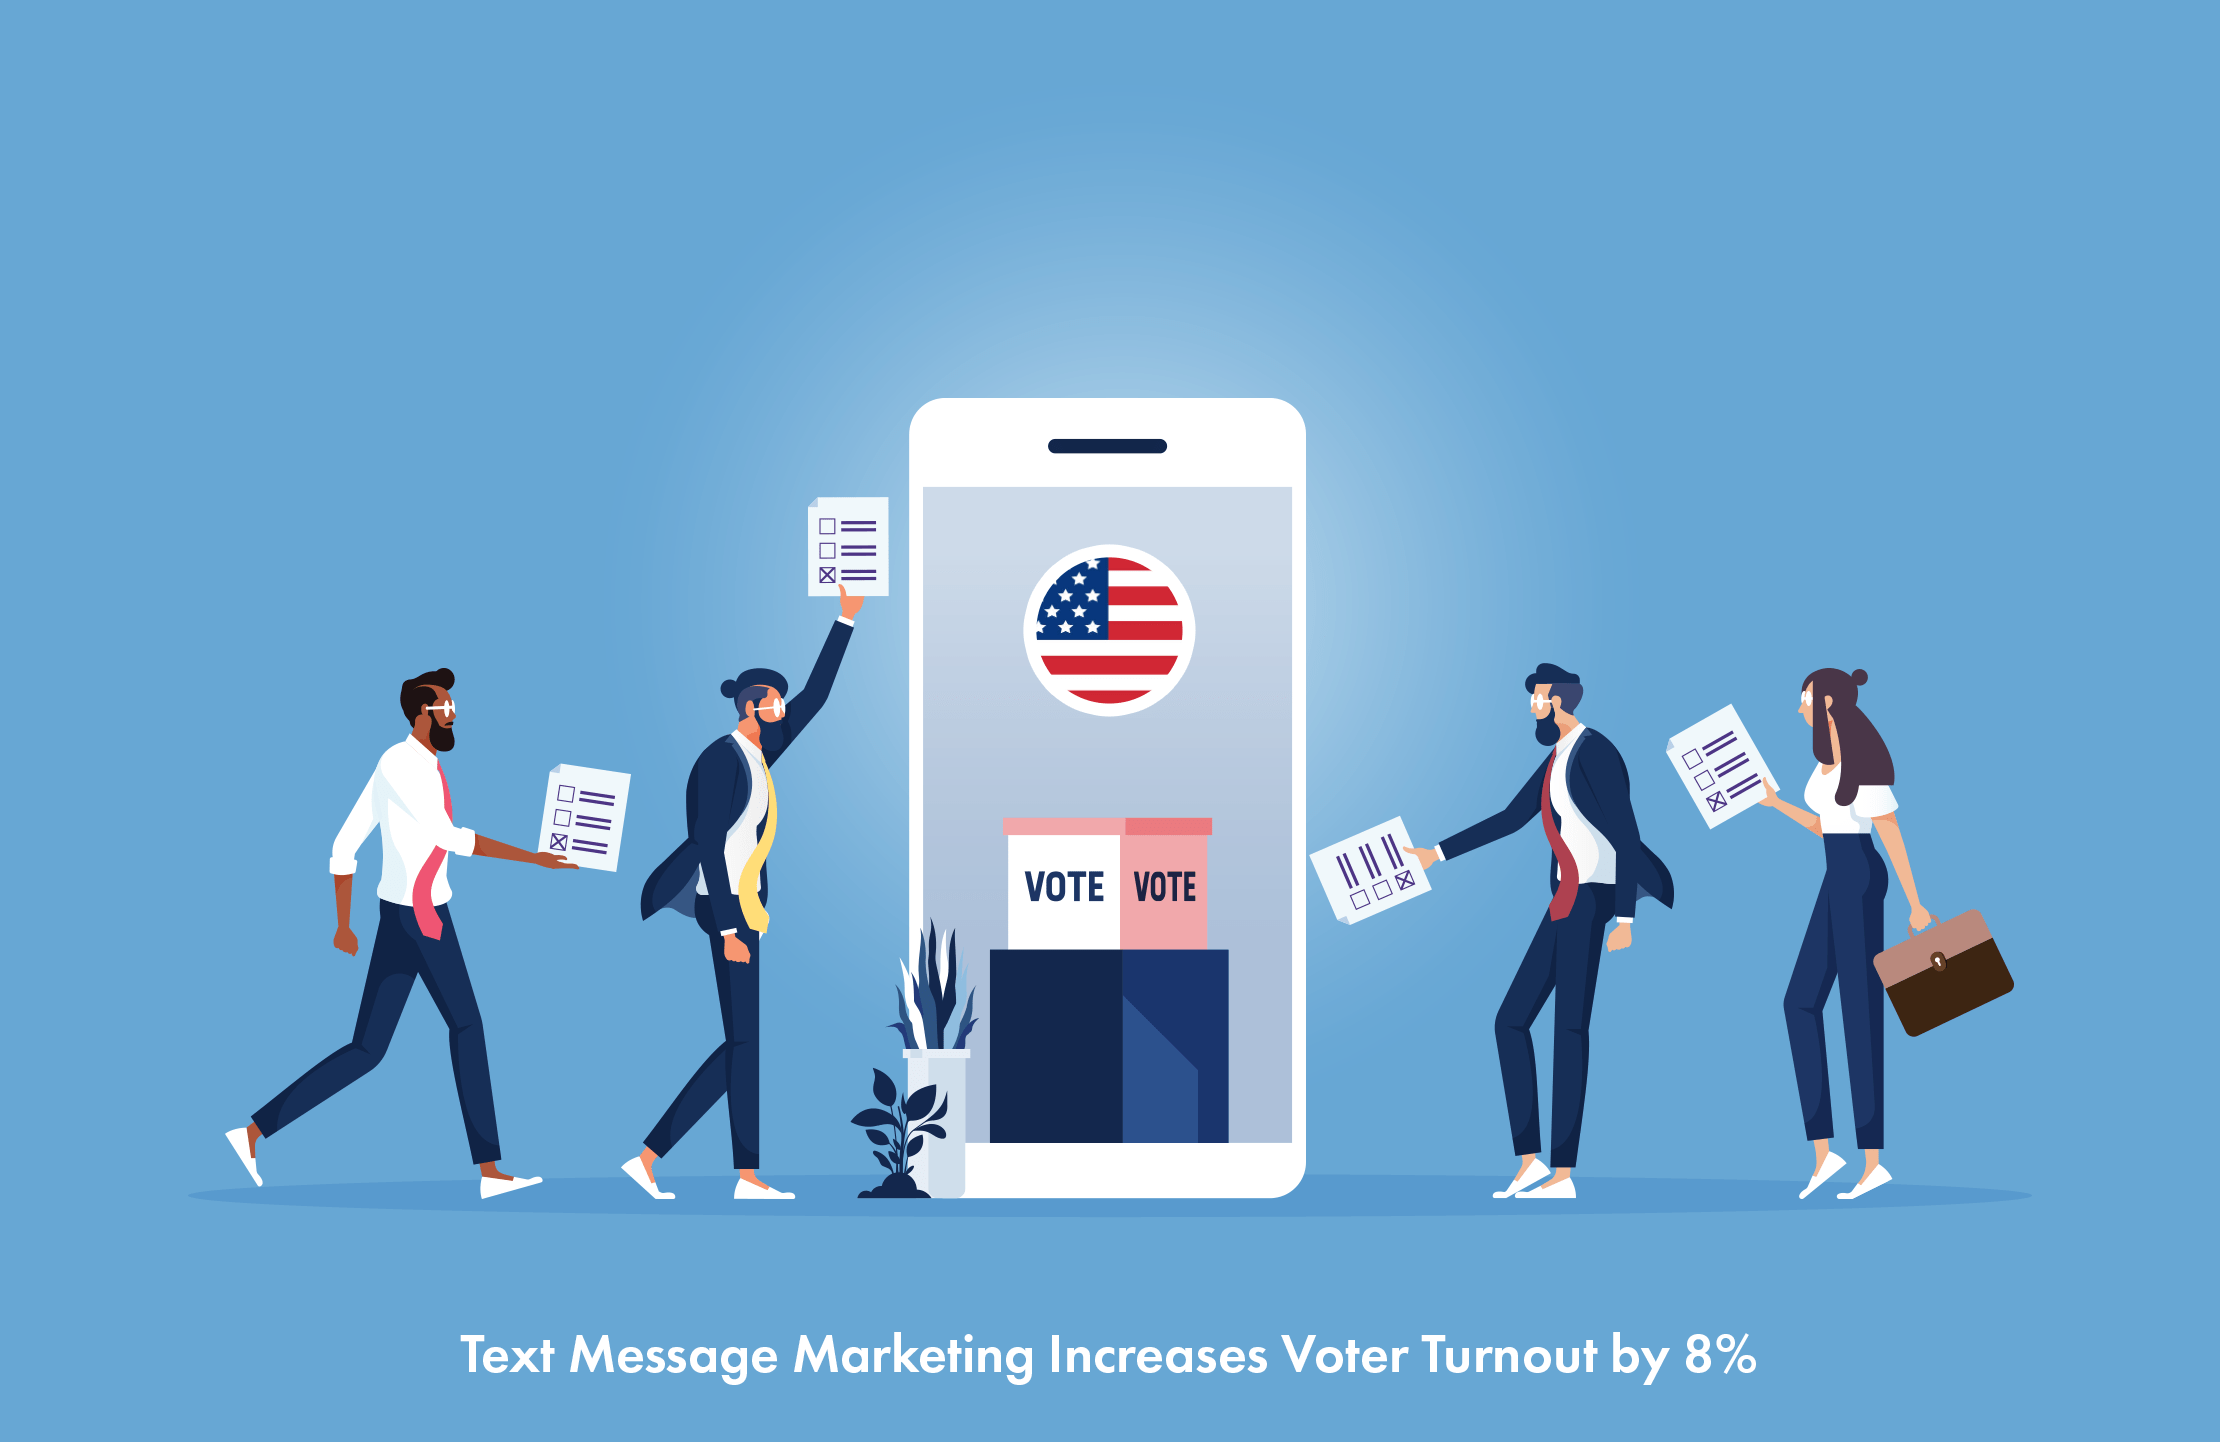 1 in 4 Voters Want Information Sent to Mobile 4